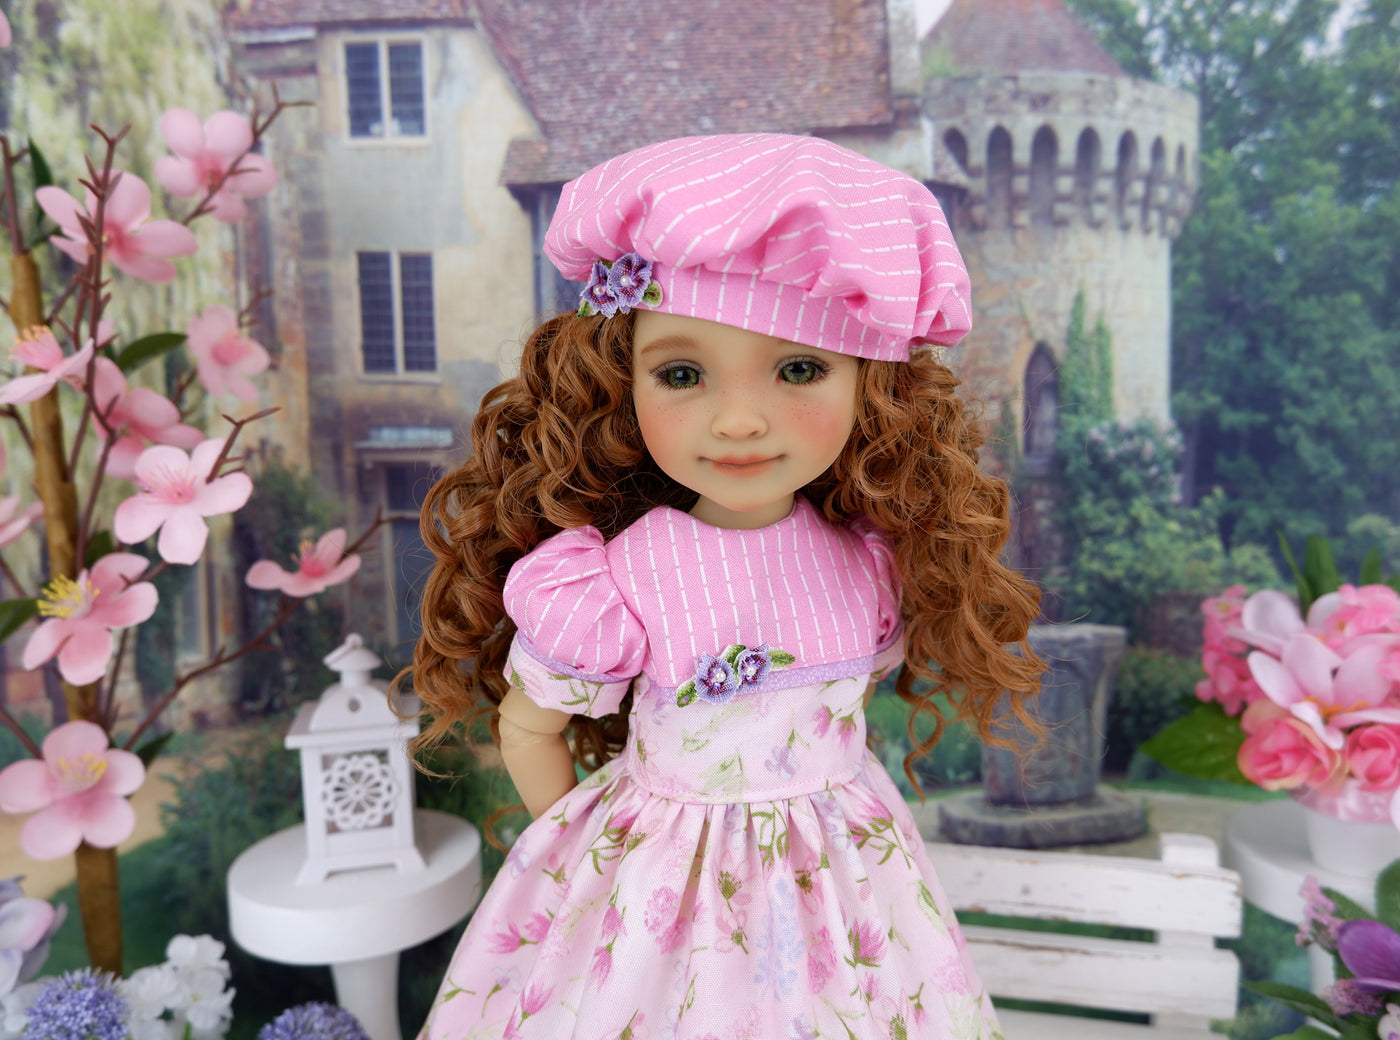 Spring Sweet Pea - dress and shoes for Ruby Red Fashion Friends doll